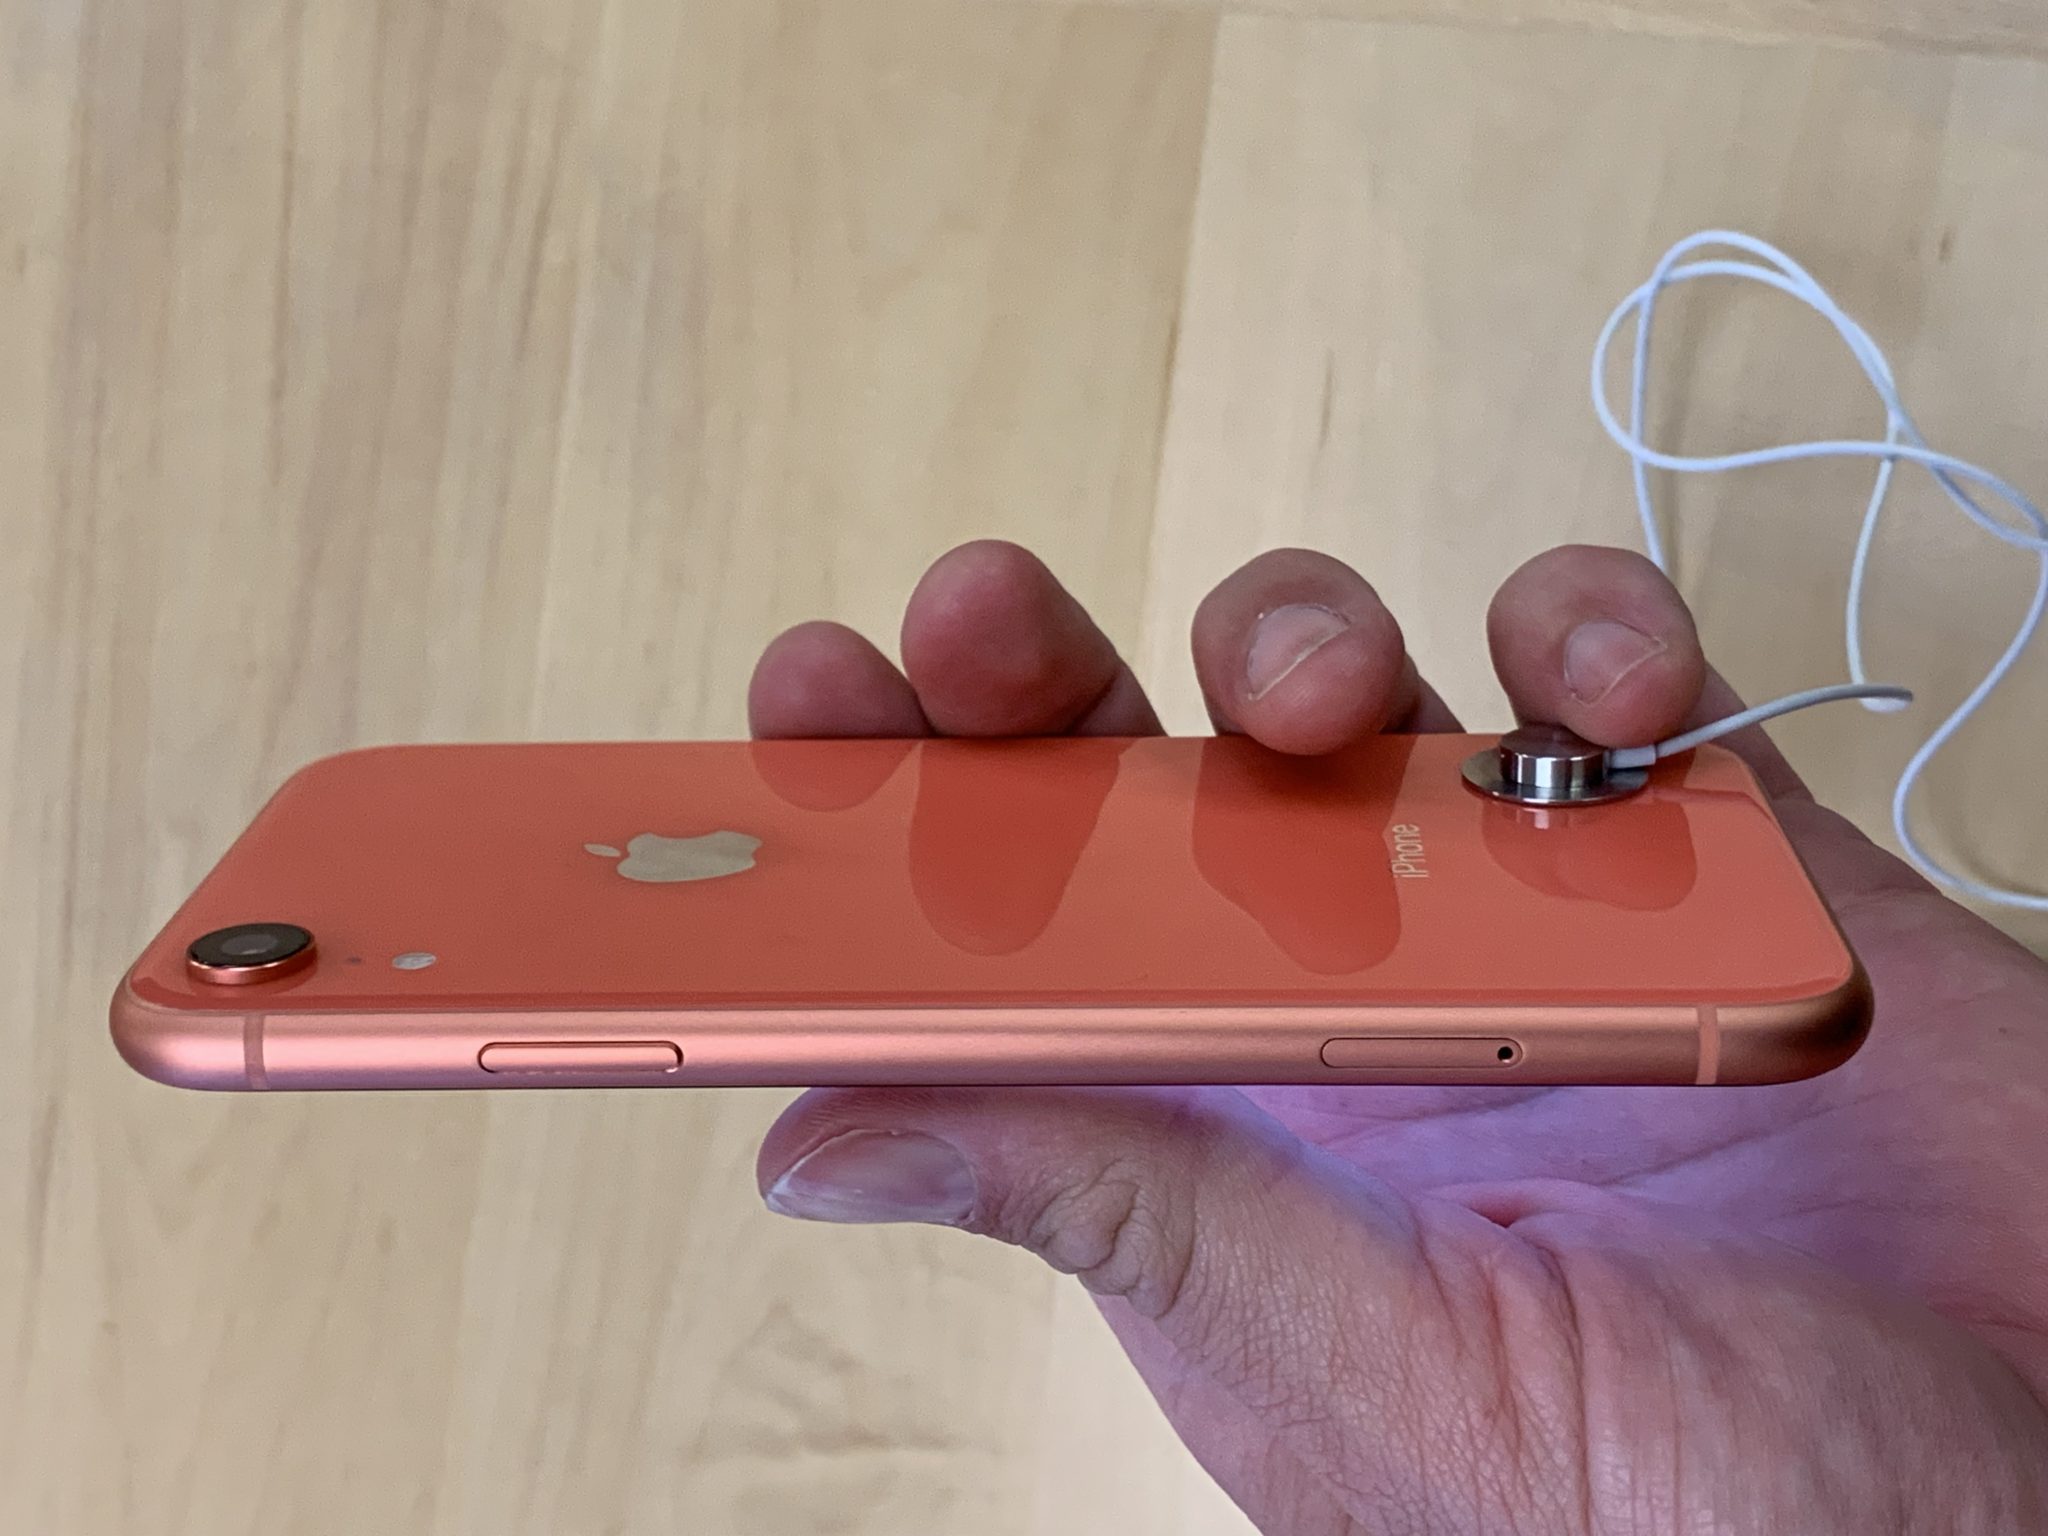 Hands On With The IPhone XR - JSWordSmith.com